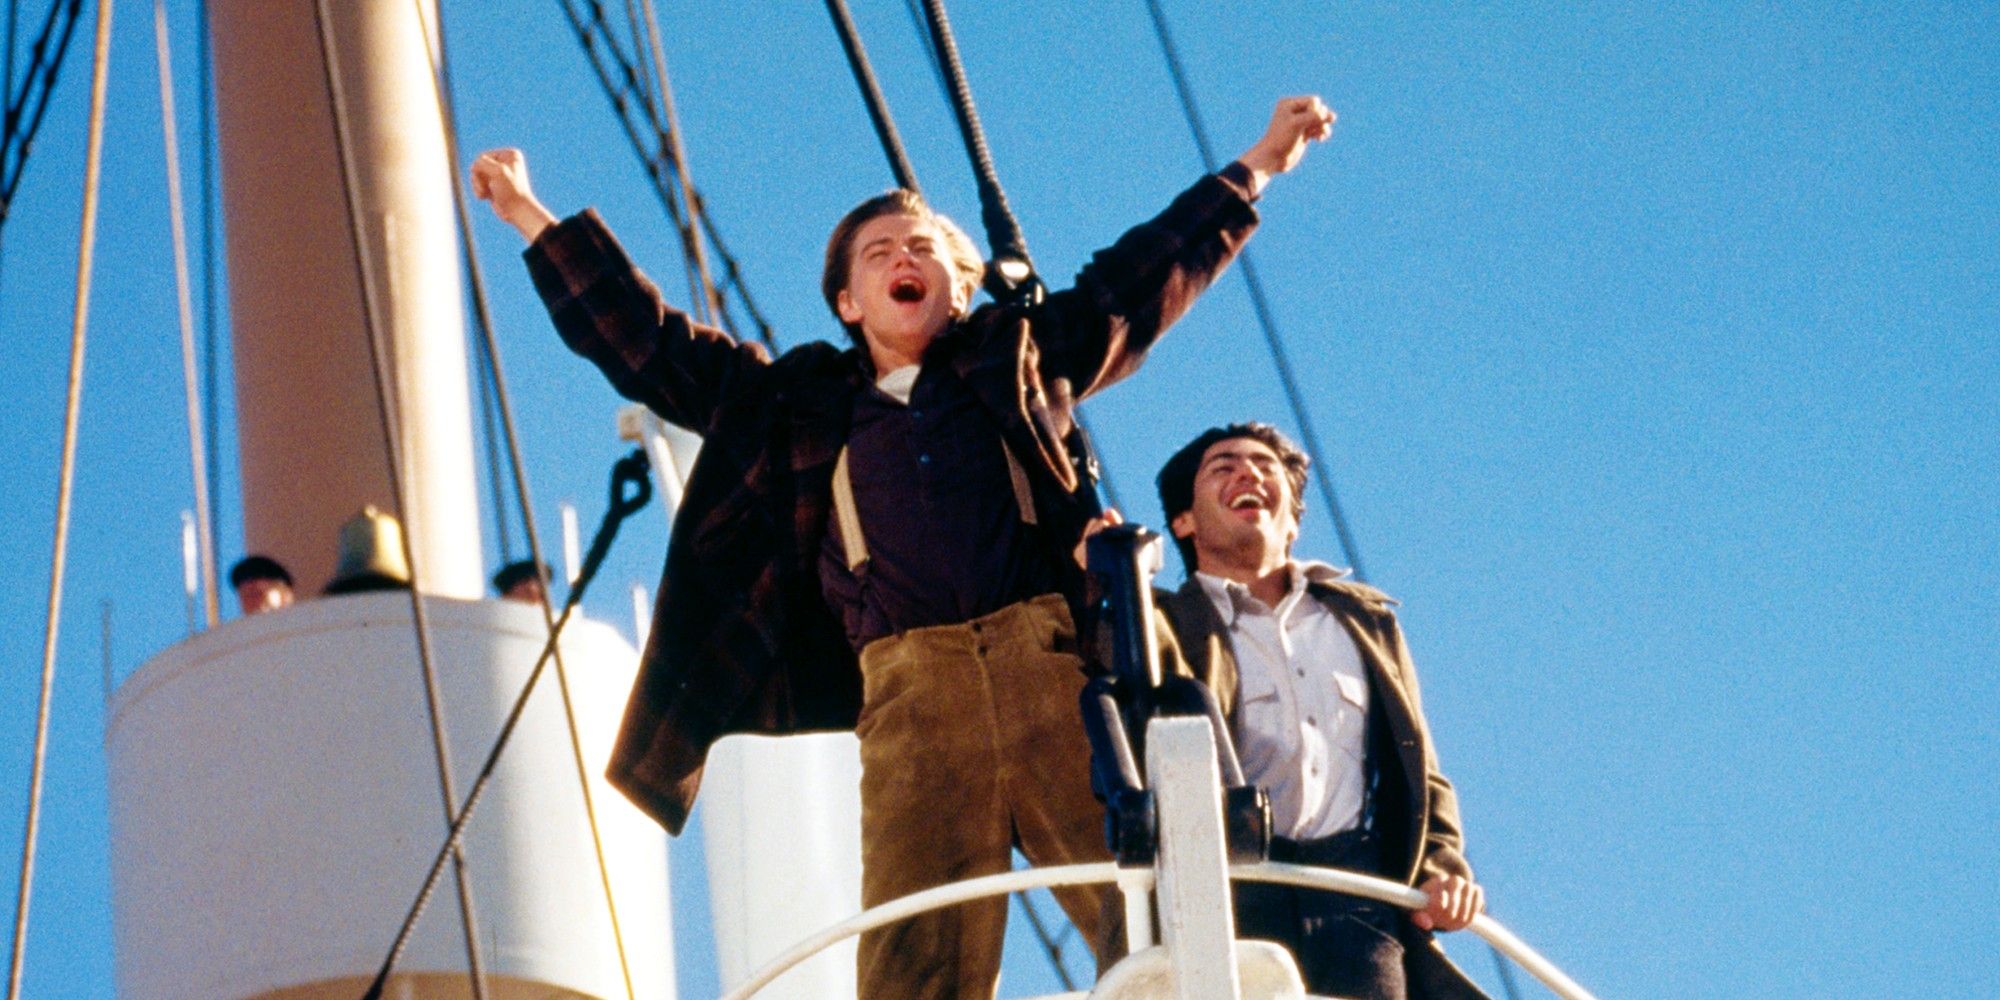 Leonardo DiCaprio as Jack in Titanic, standing at the bow of the ship with his arms raised and screaming